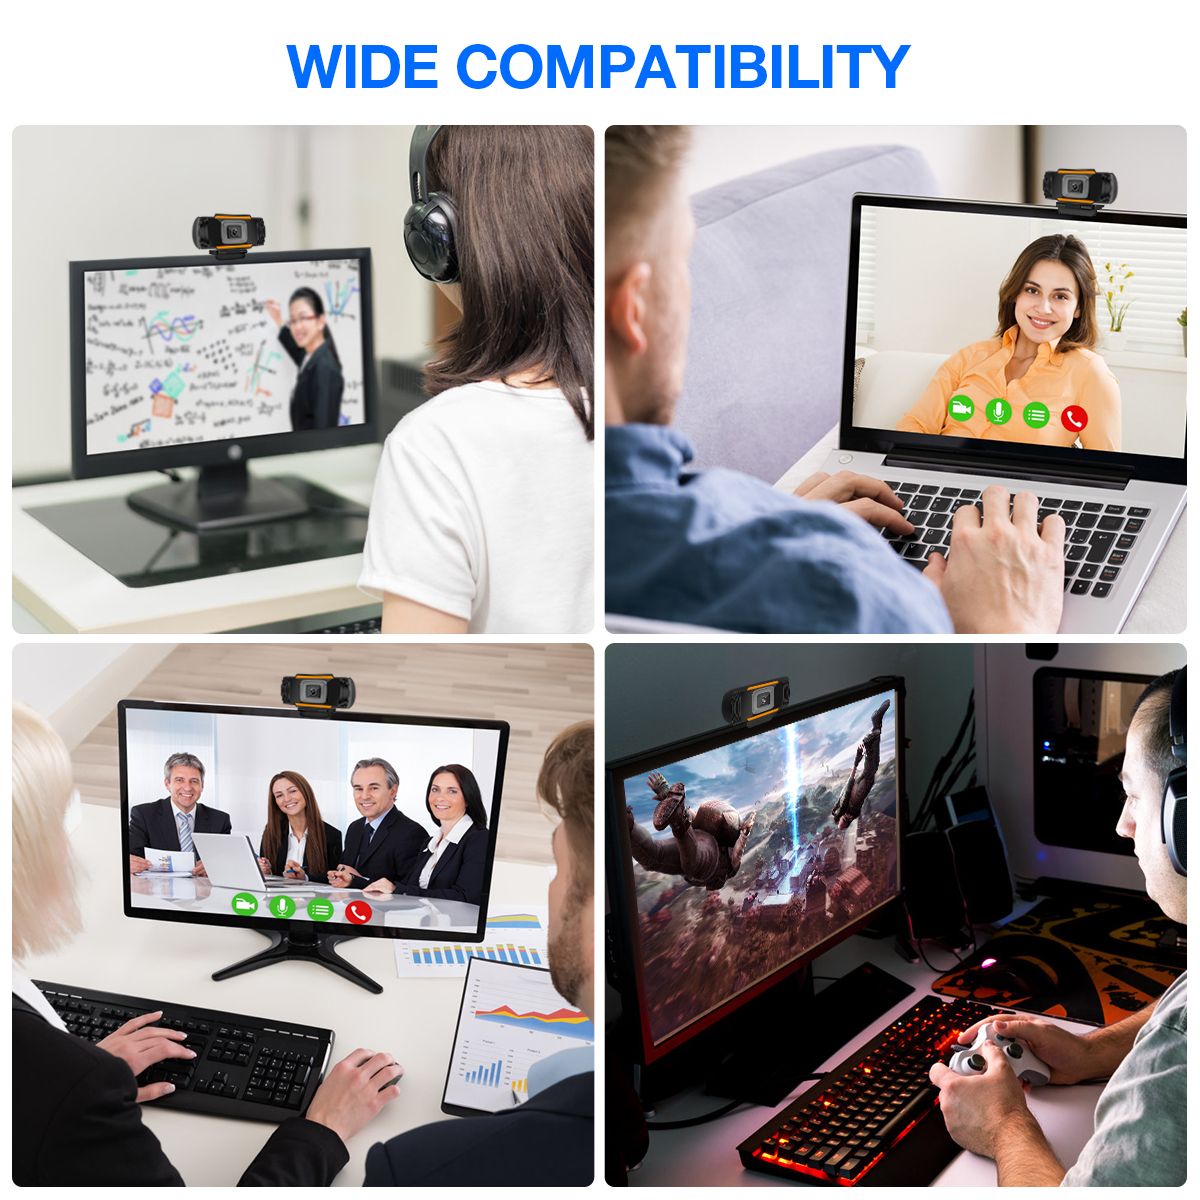 720P-HD-Free-Drive-USB-Webcam-Automatic-Dimming-Conference-Live-Computer-Camera-Built-in-Noise-Reduc-1673830